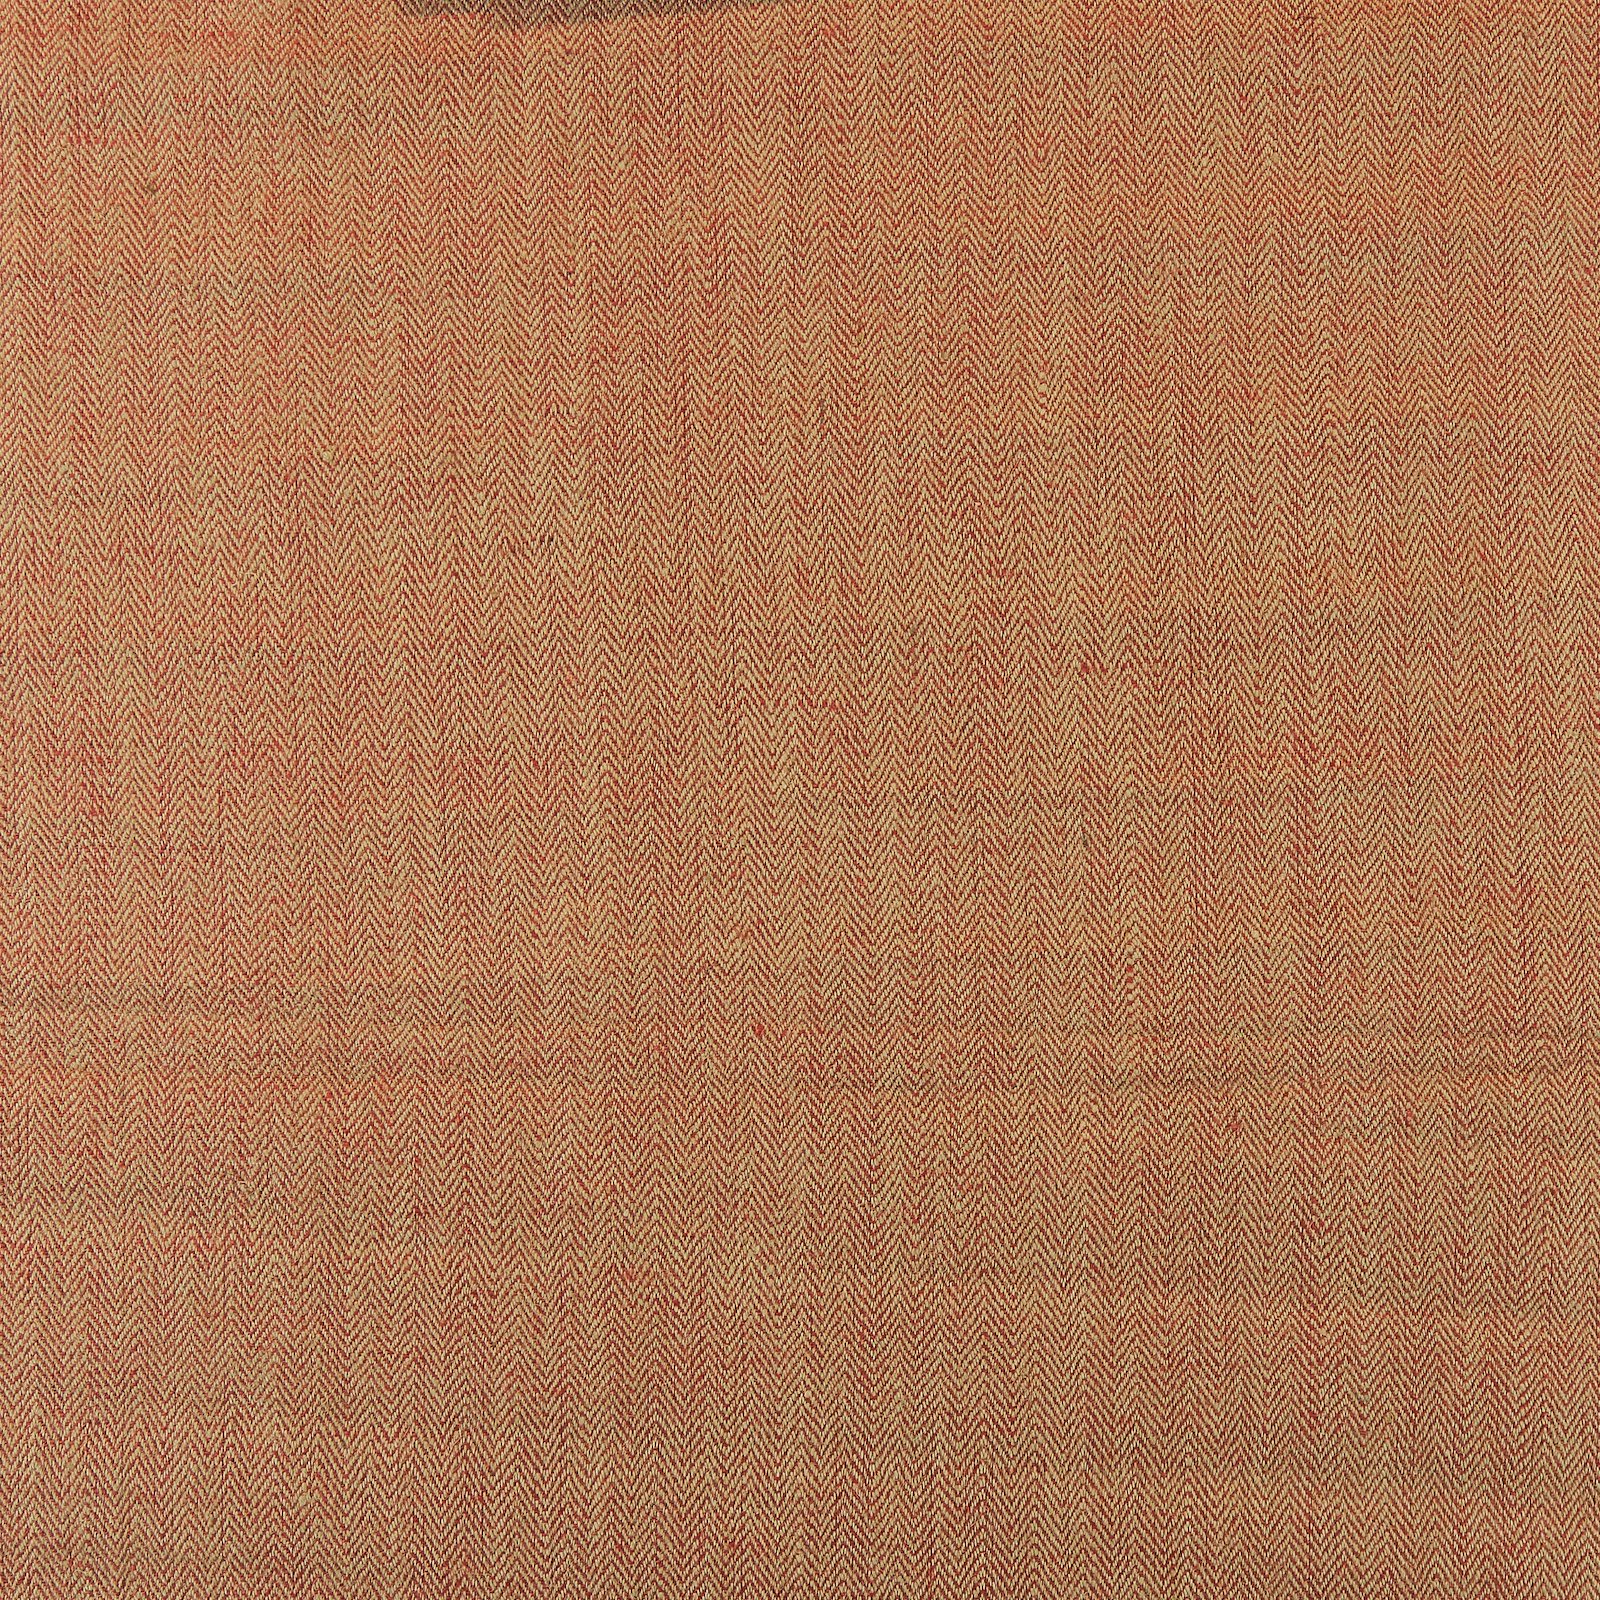 Hessian jacquard nature/red zigzag 9196_pack_sp